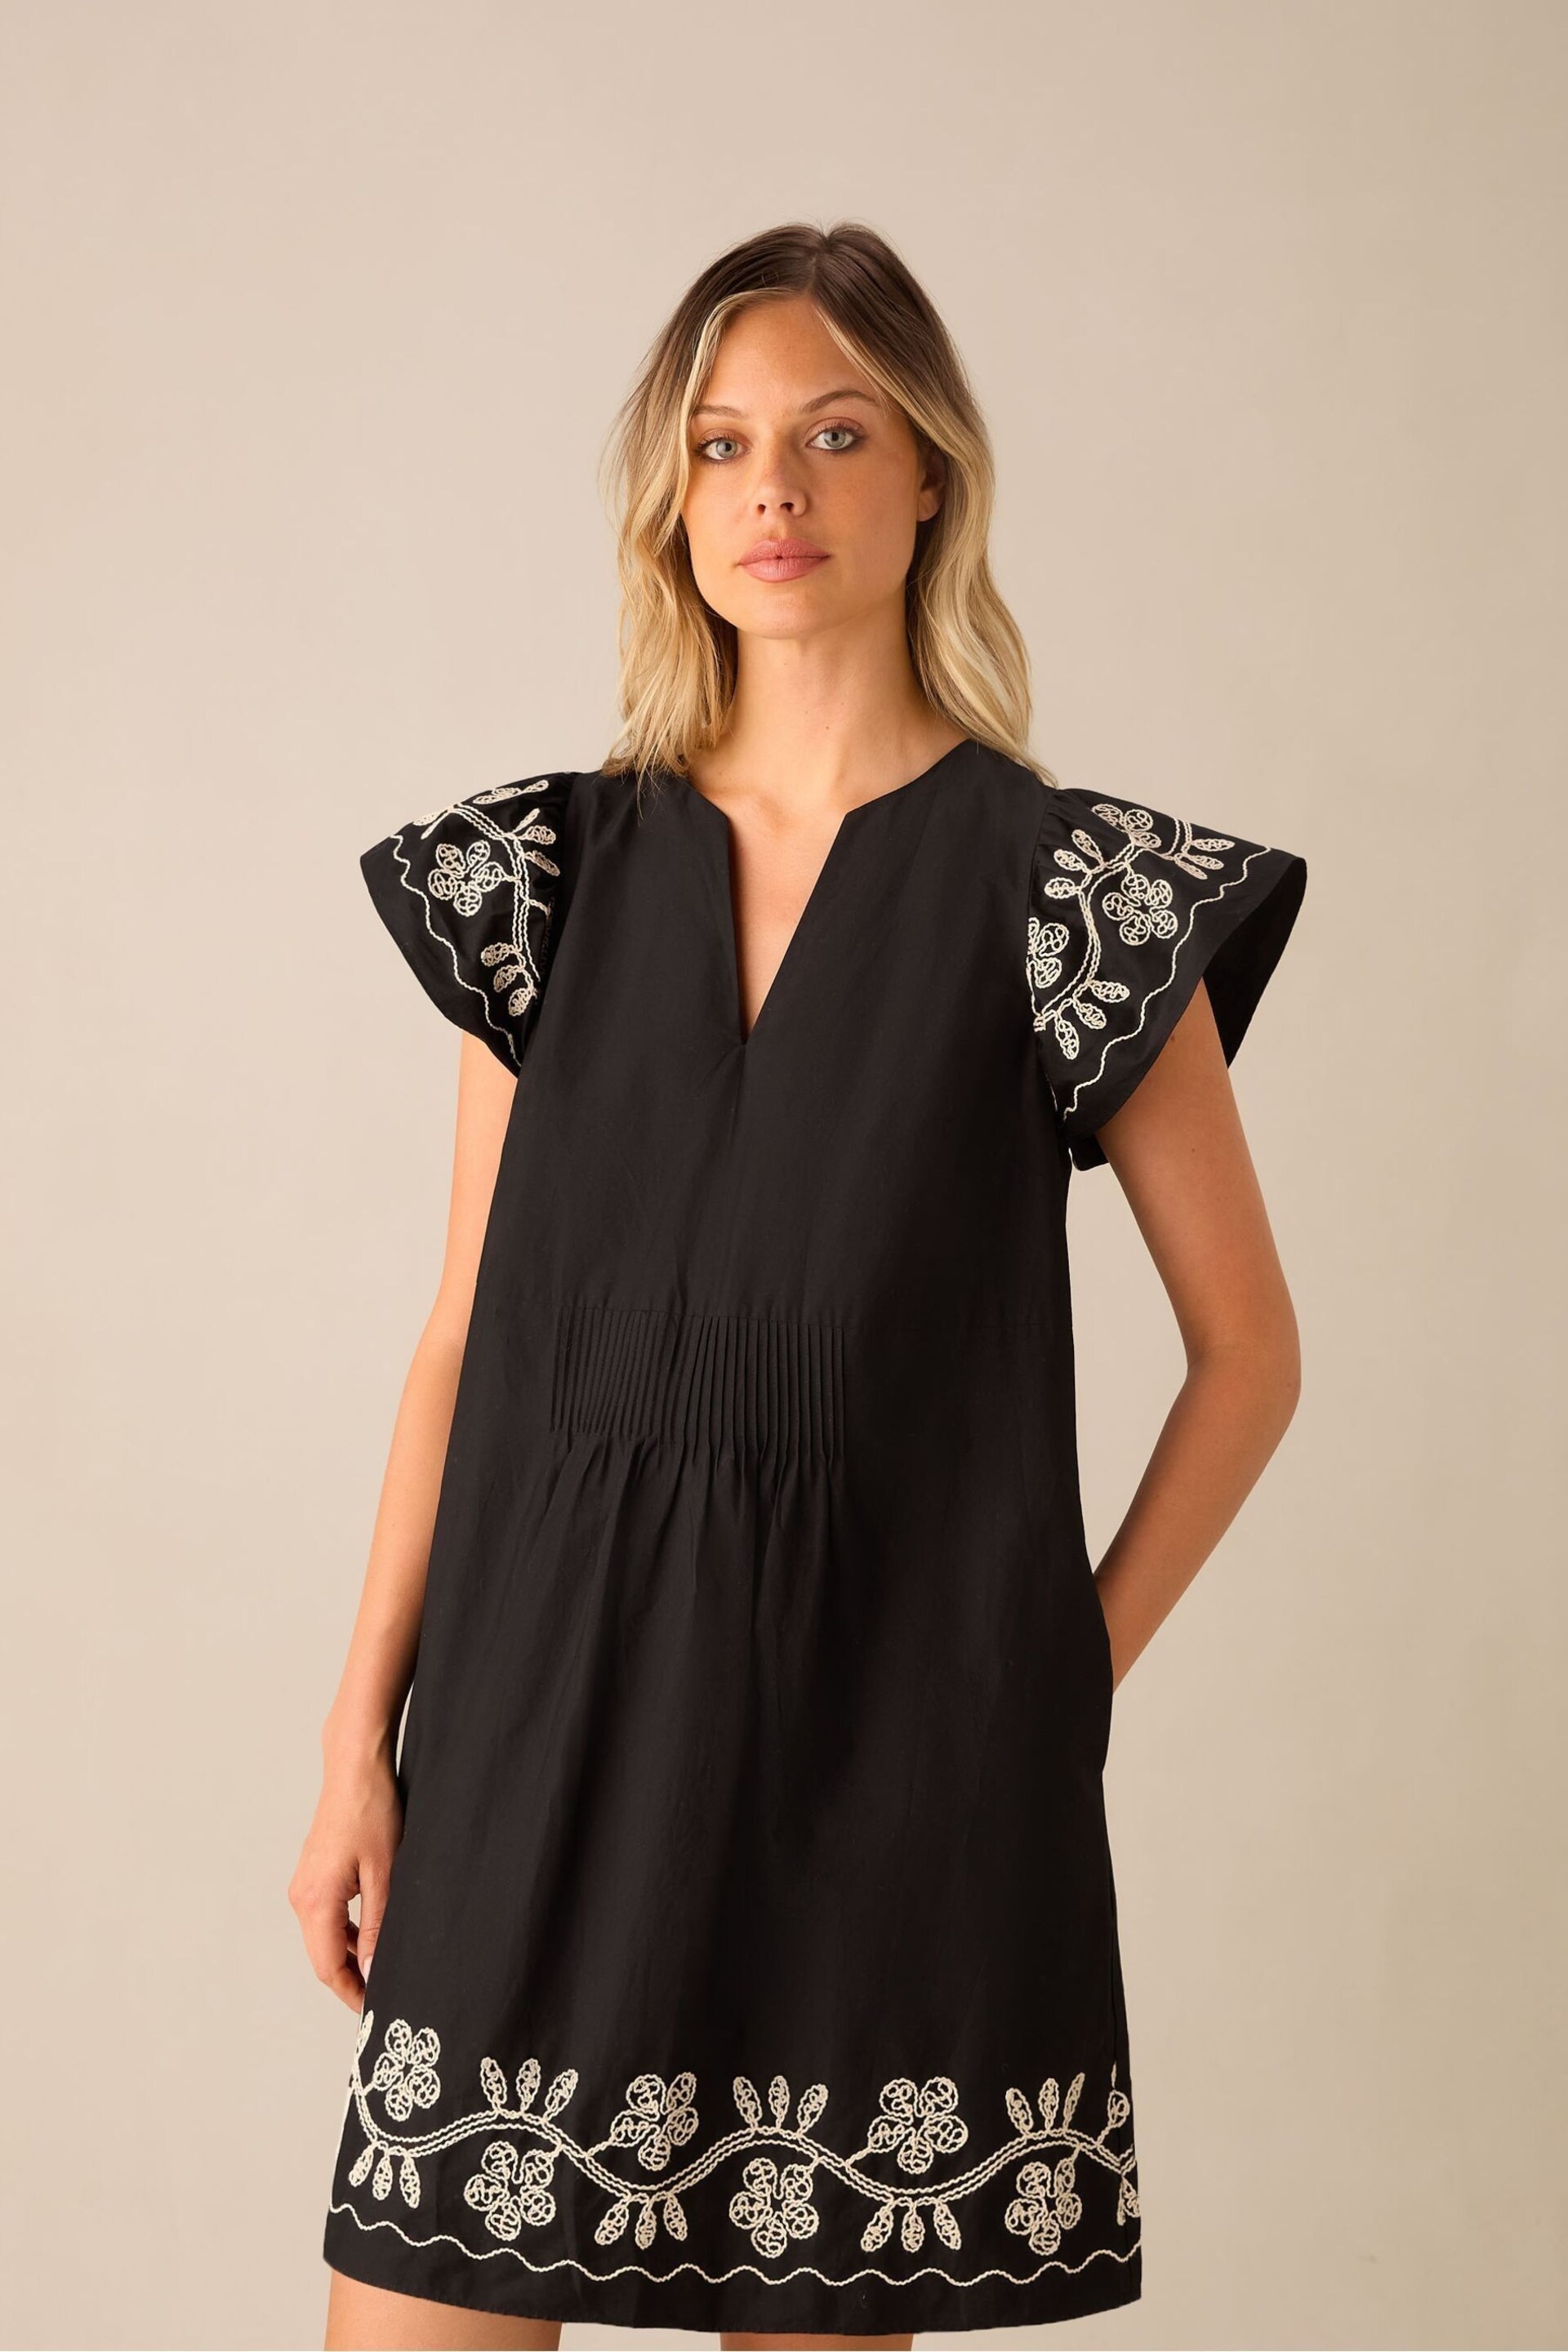 Ro&Zo Embroidery Frill Short Black Dress - Image 1 of 8